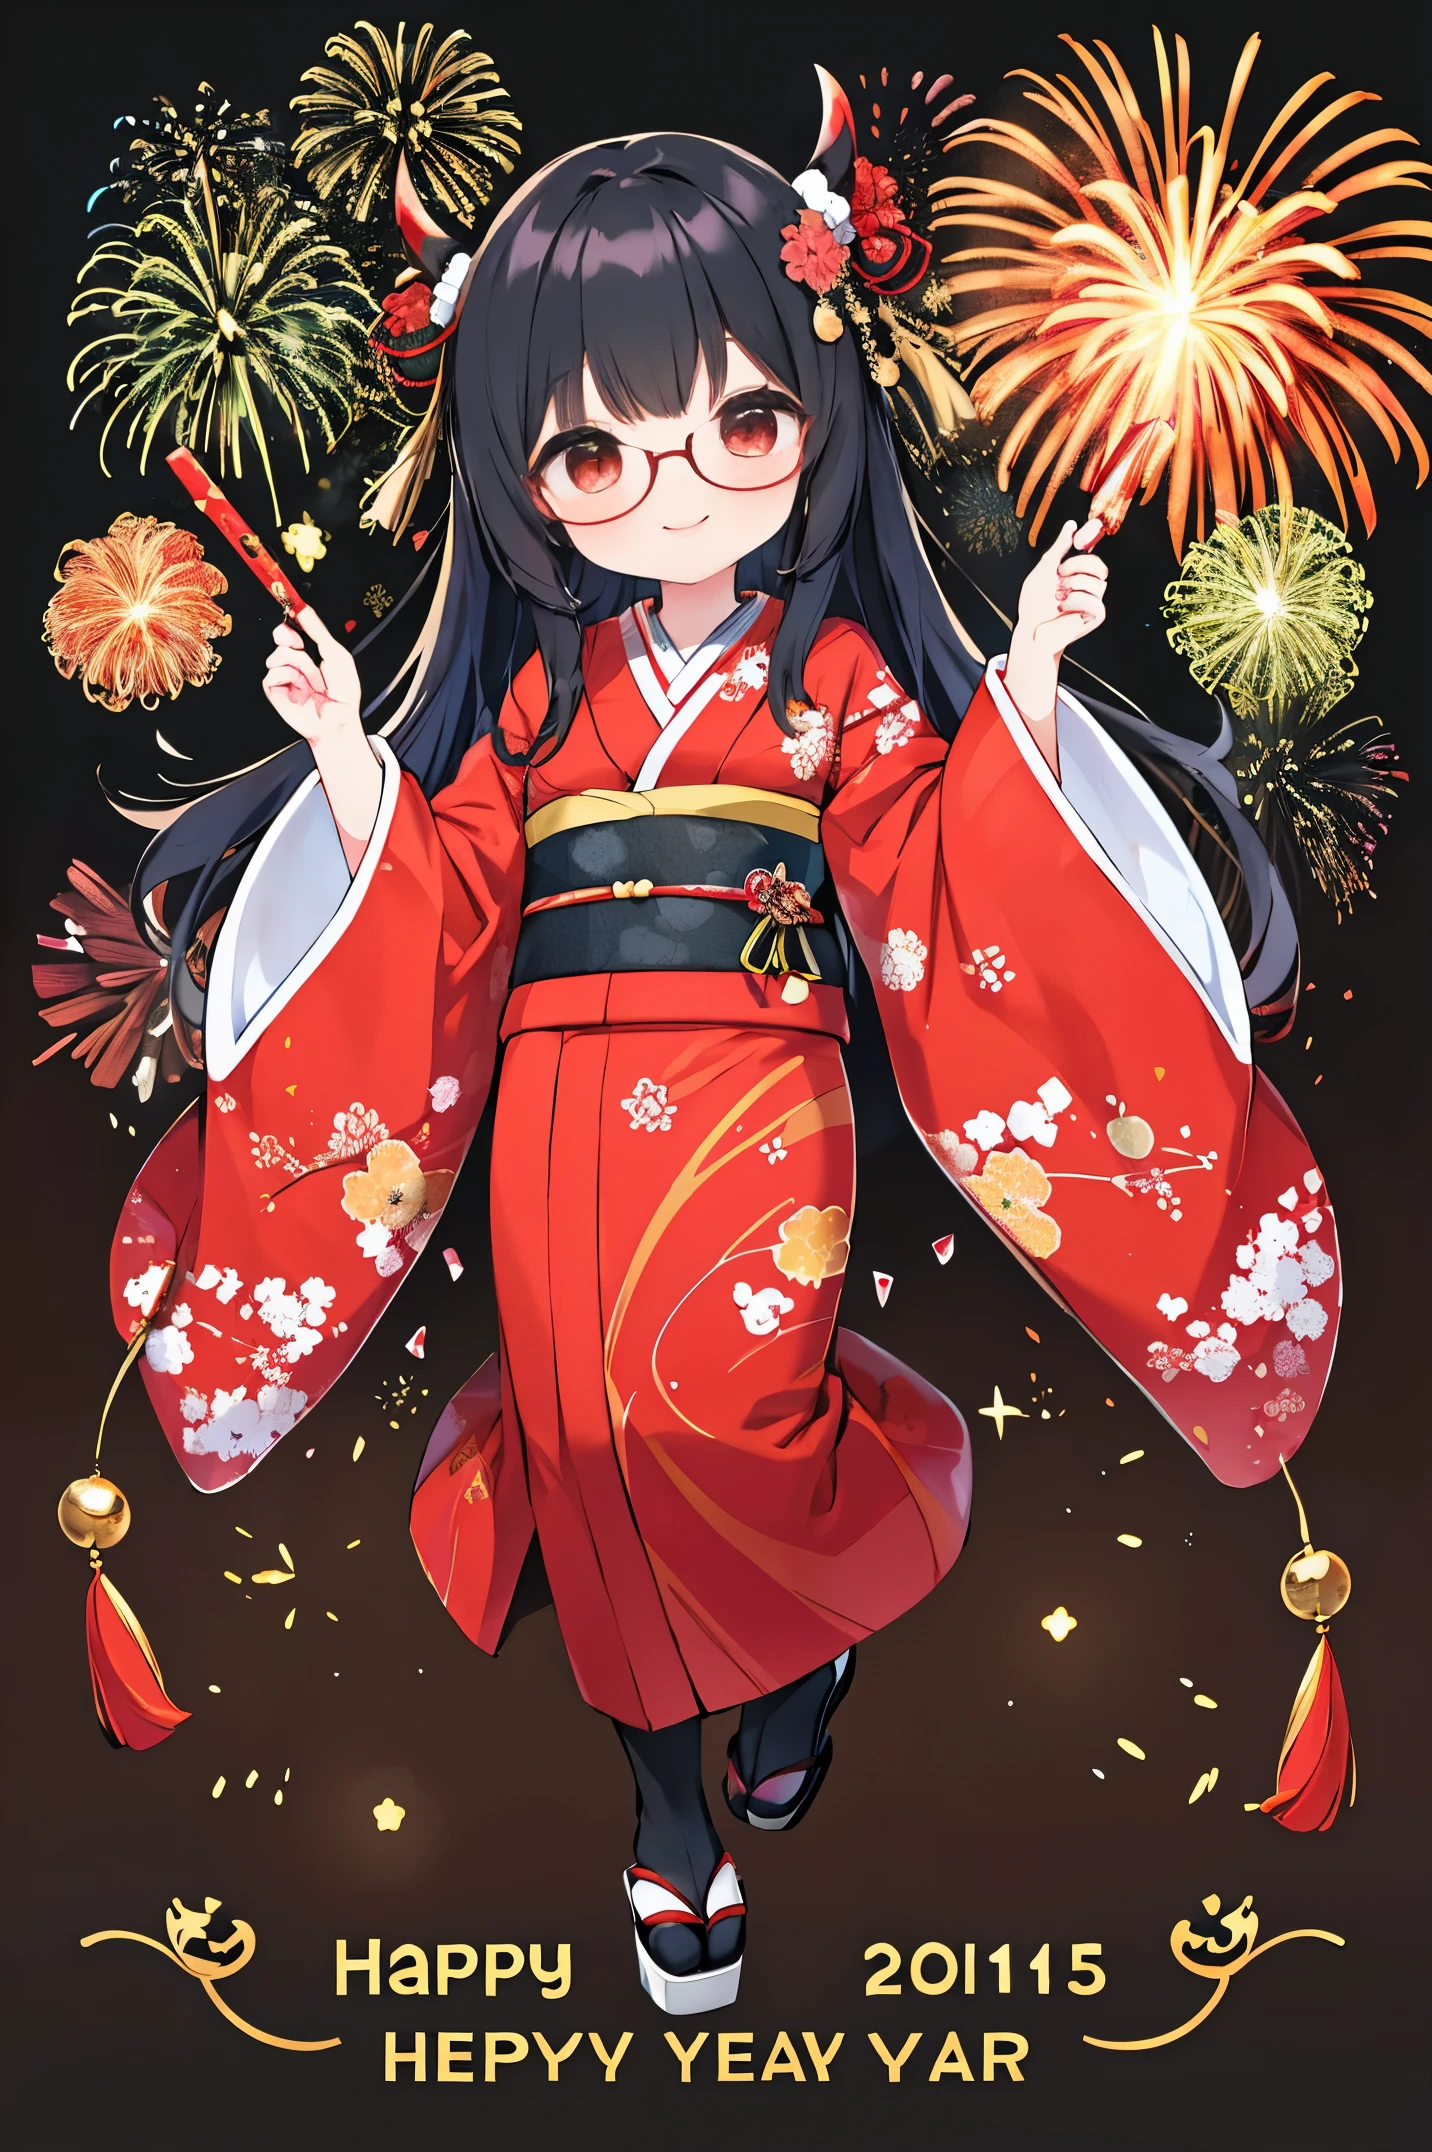 "anime girl, 1 person, black hair, shoulder length hair, red eyes, glasses, white horns, wearing kimono, kimono outfit, black kimono with red patterns, details, big breasts, long stockings, sinister smile  , small black wings on the back, solo,chibi, full body, viewed from different directions, festival, New Year's Eve, New Year's Eve fireworks, watching fireworks (sharp image)"